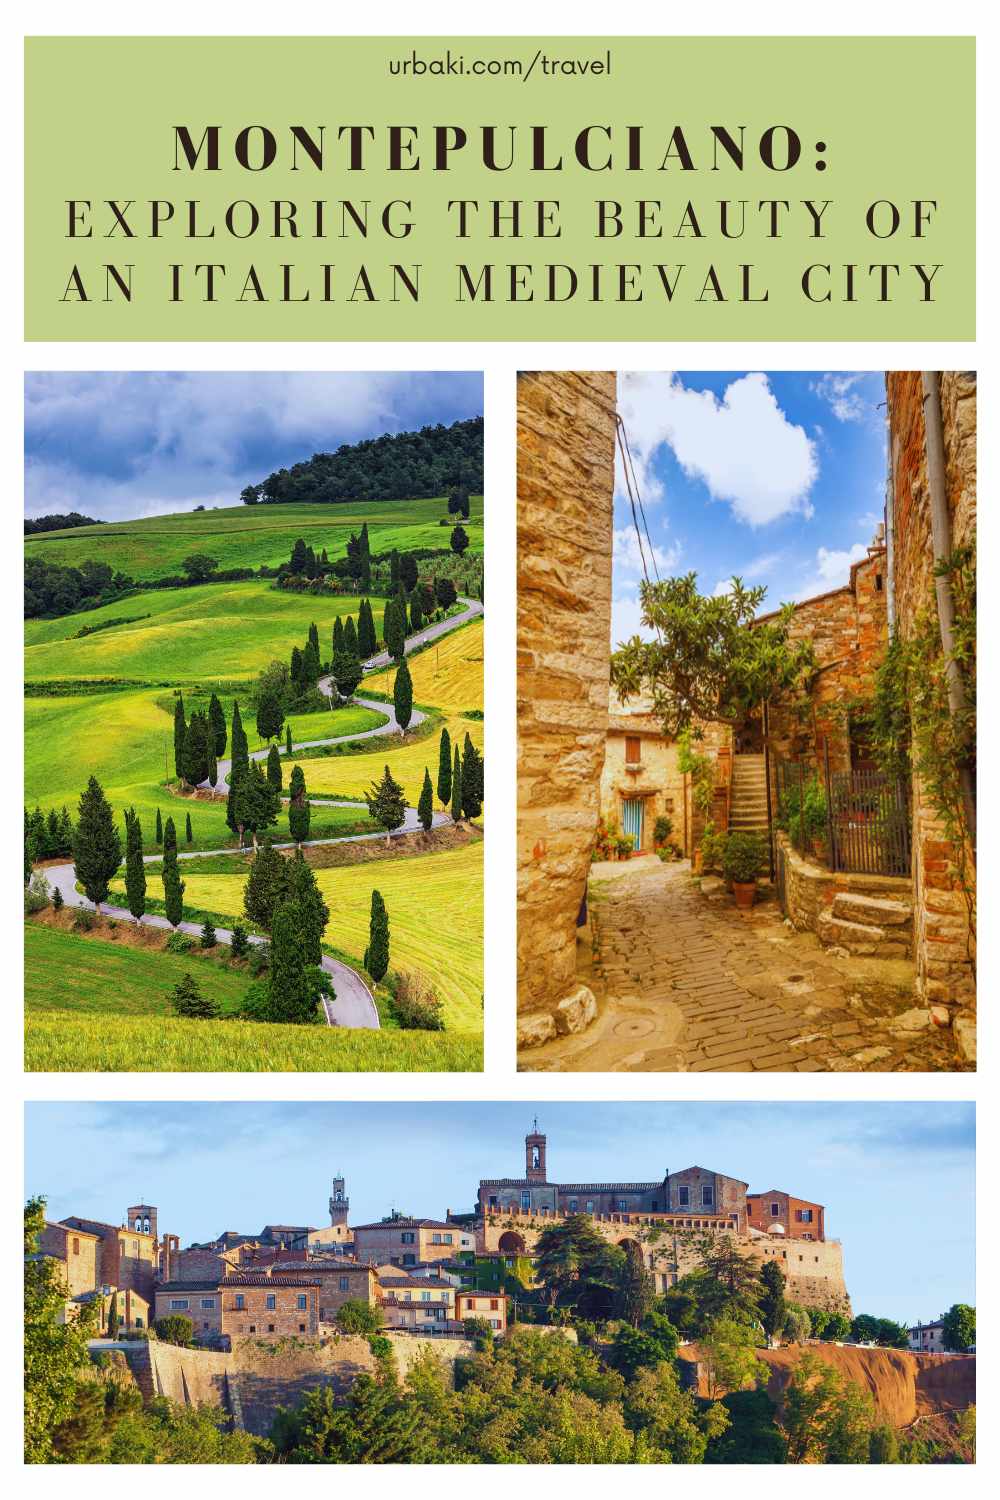 Montepulciano: Exploring the Beauty of an Italian Medieval City